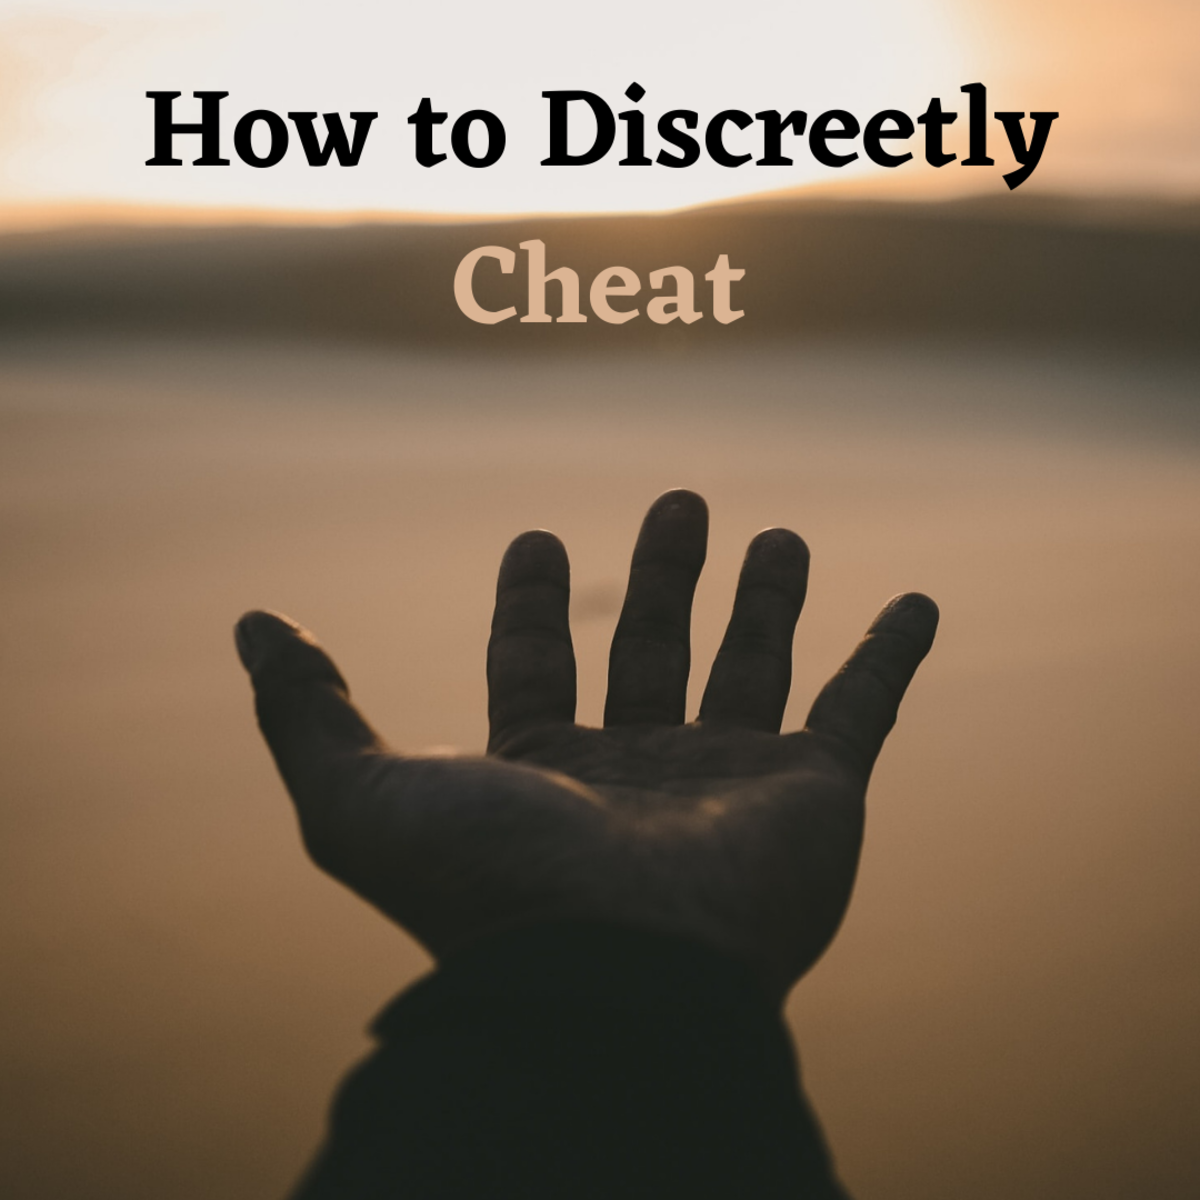 how to cheat